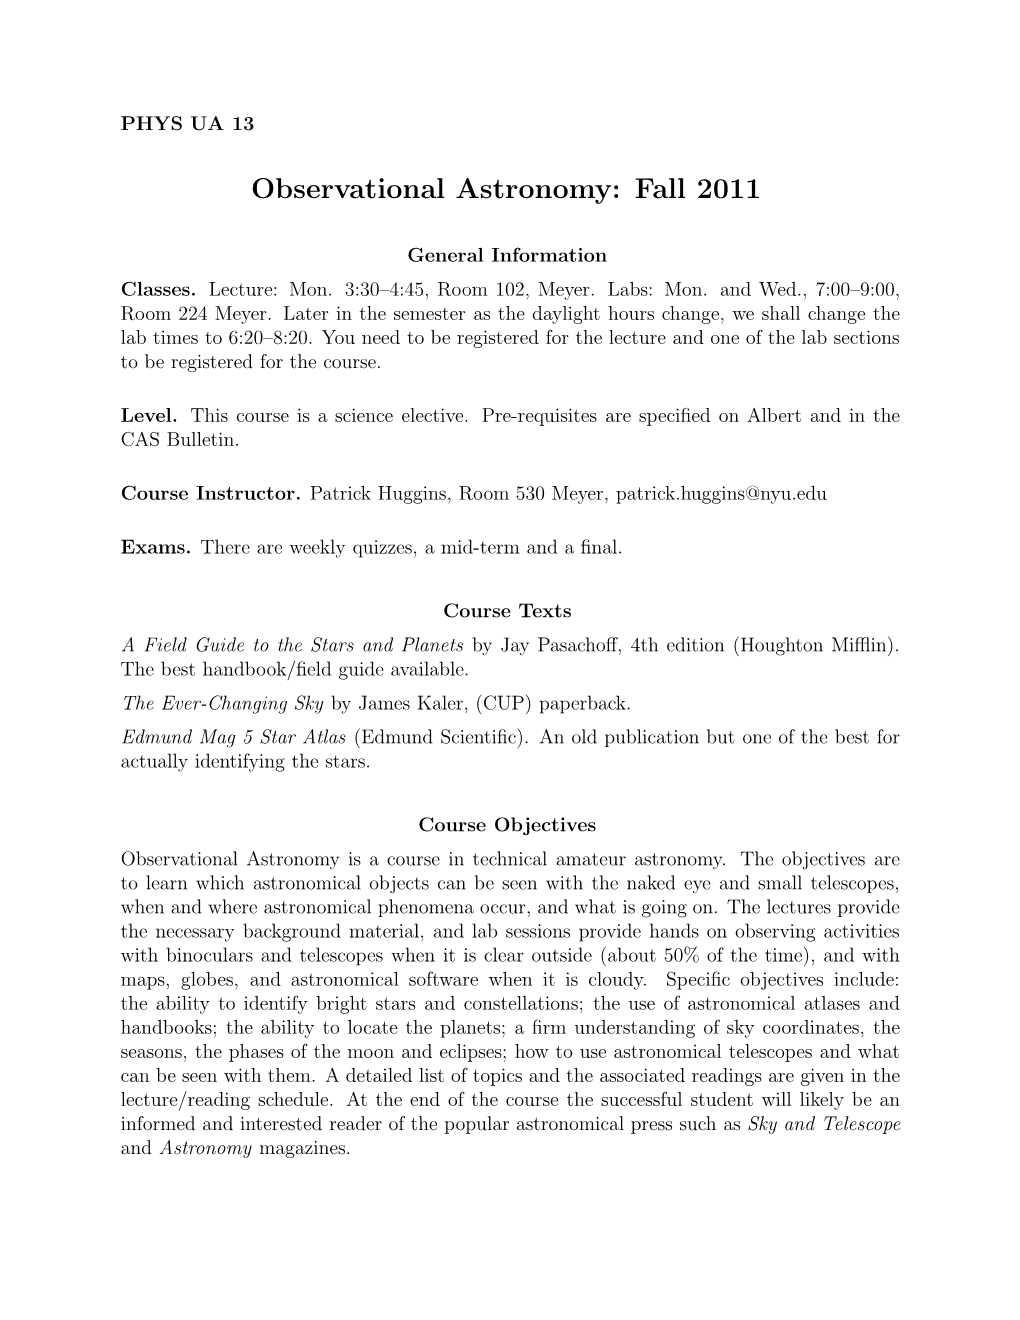 Observational Astronomy: Fall 2011